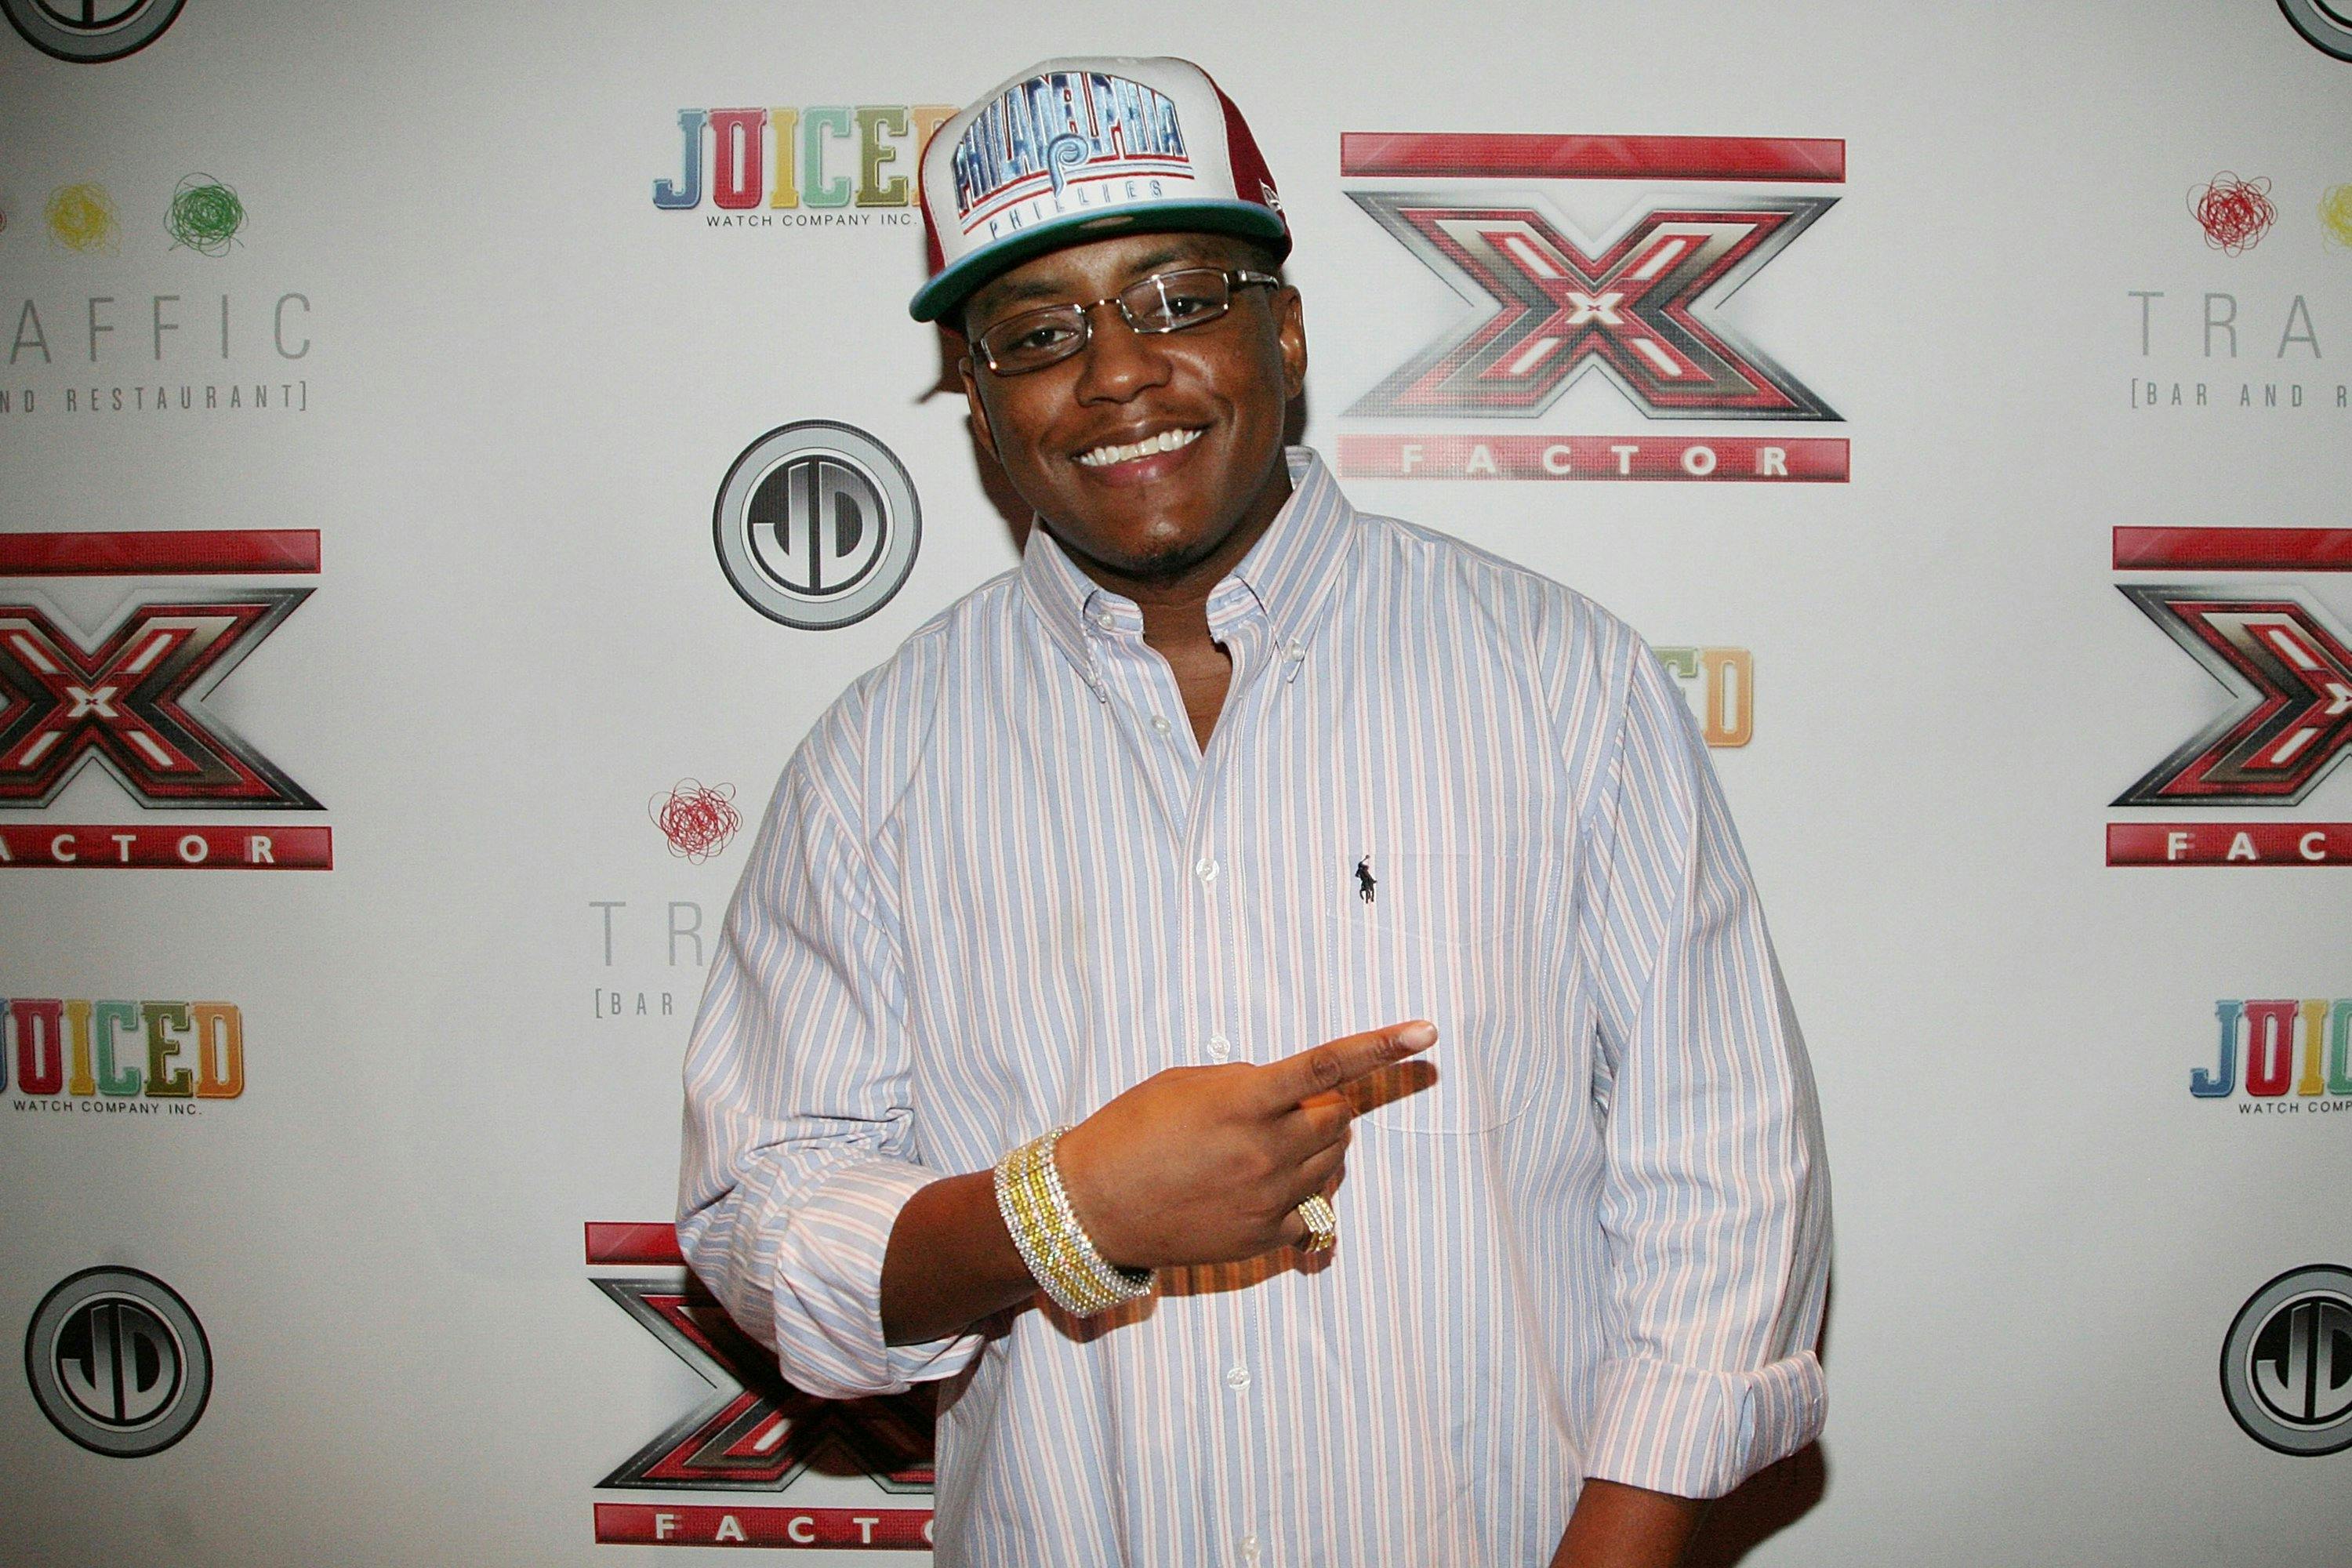 Cassidy Rapper attends the “X Factor” New York Premiere